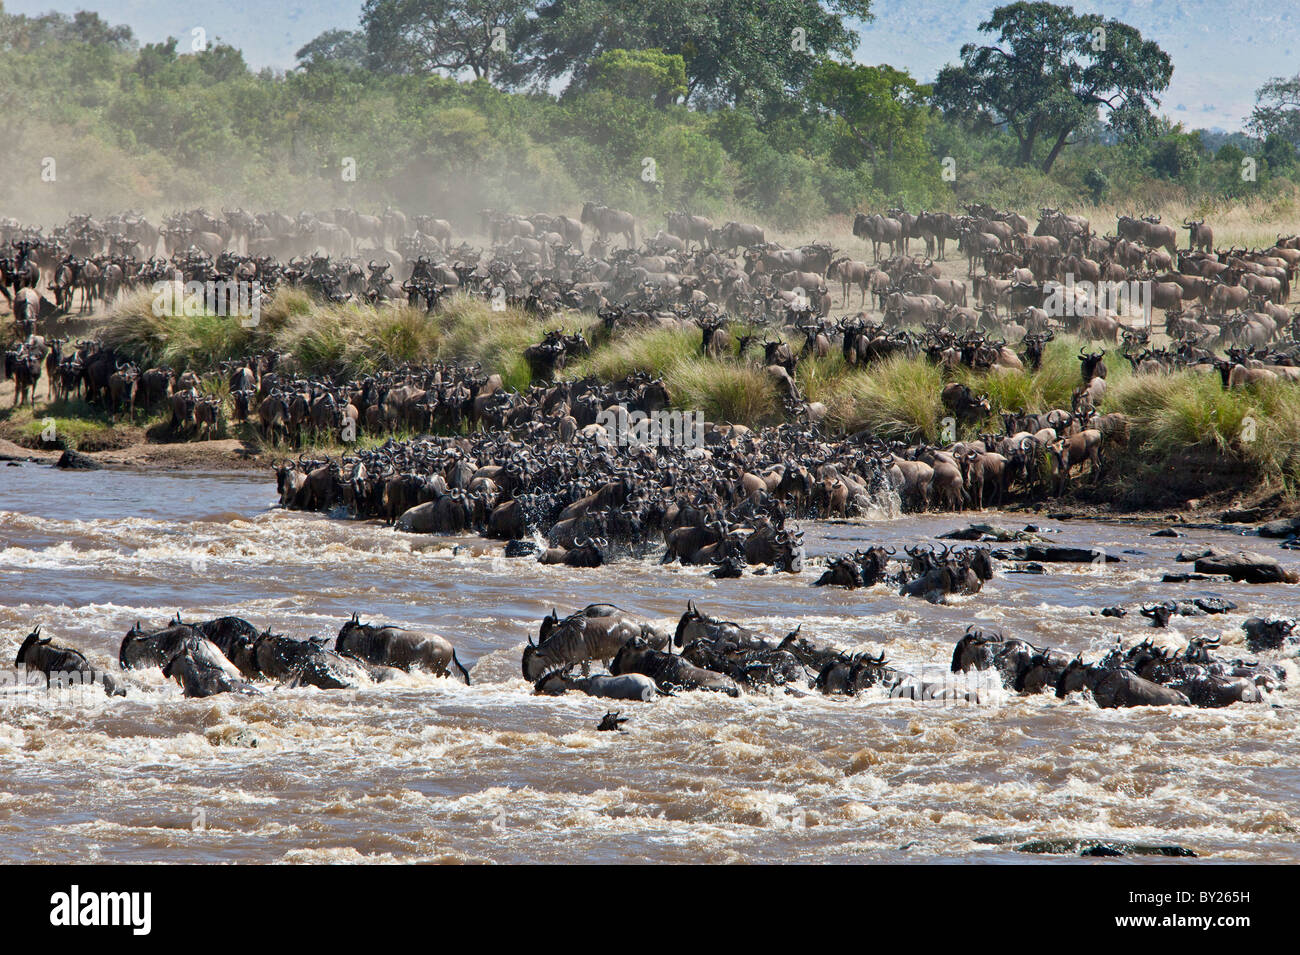 Wildebeest crossing the Mara River during their annual migration from the Serengeti National Park in Northern Tanzania to the Stock Photo